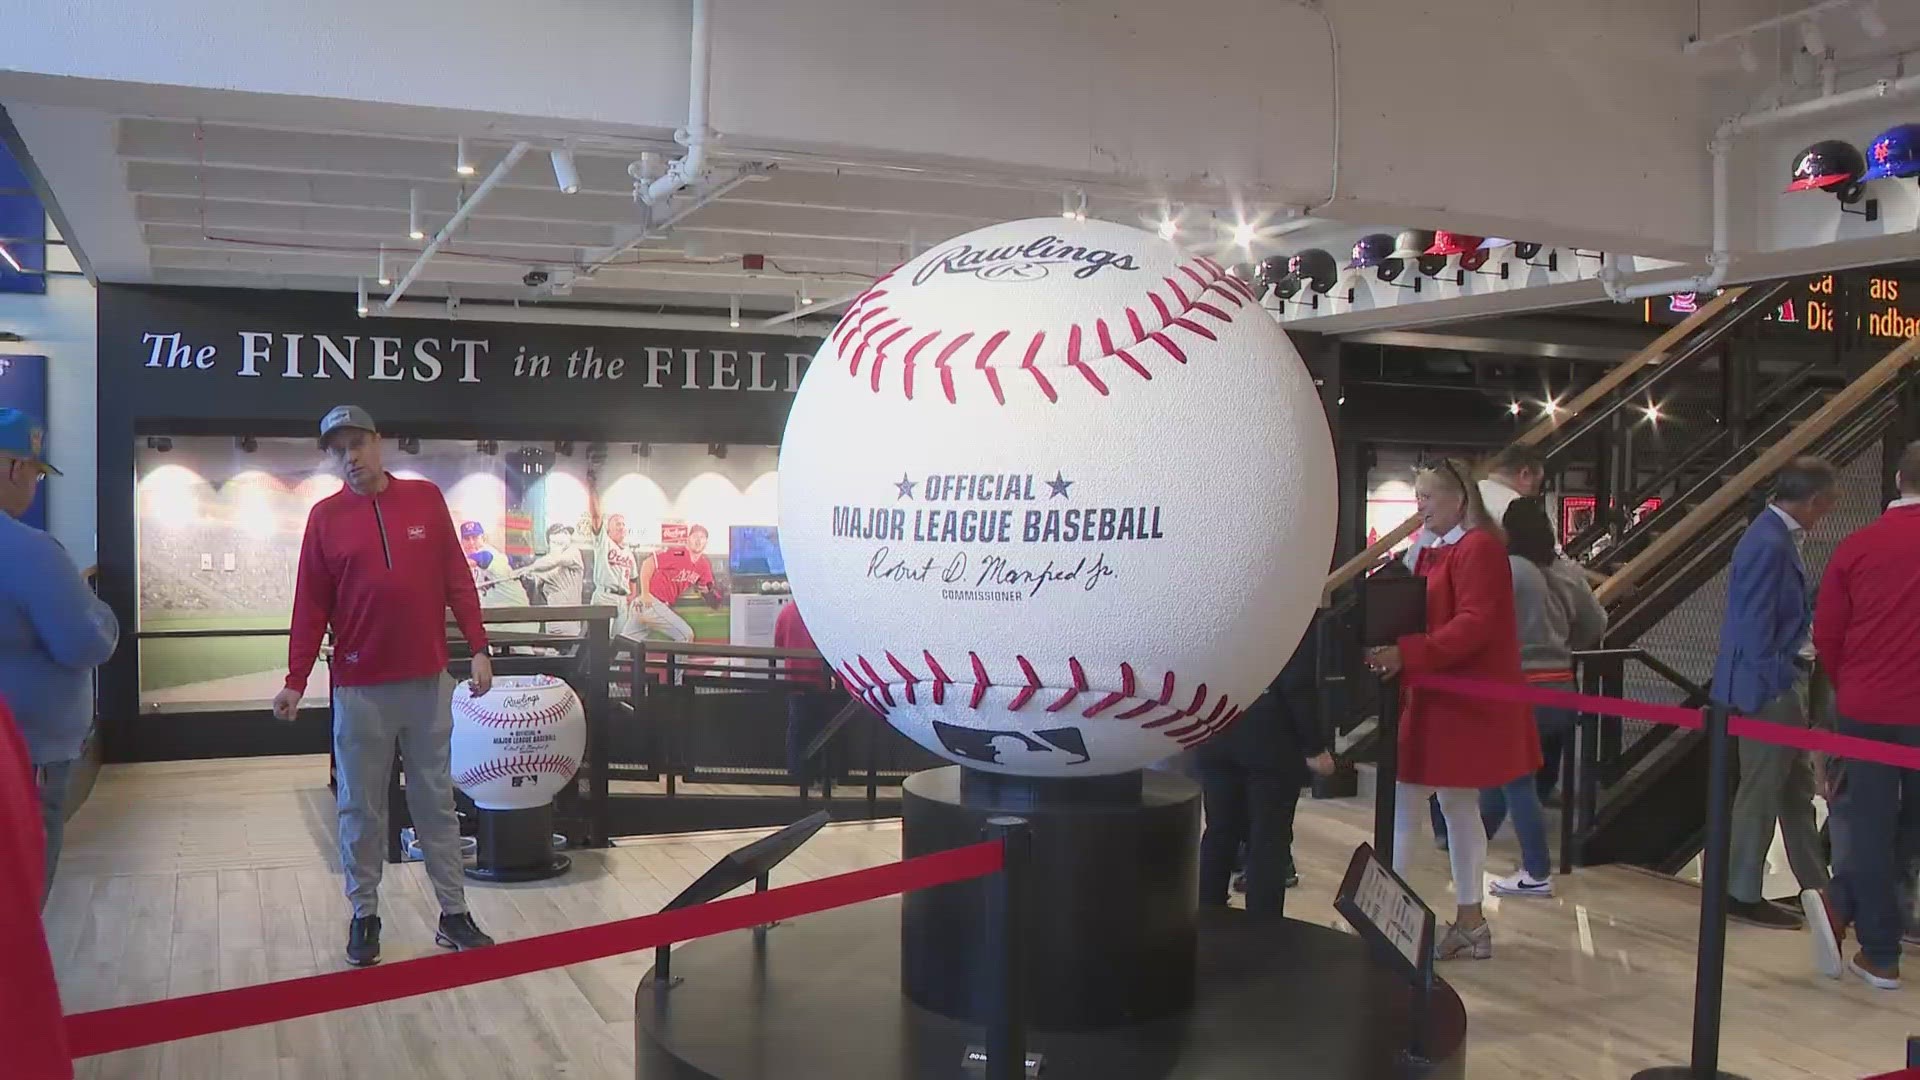 A new one-of-a-kind baseball experience opened Friday in Maryland Heights. The Rawlings Experience features historic gear, a high-tech batting cage and photo ops.